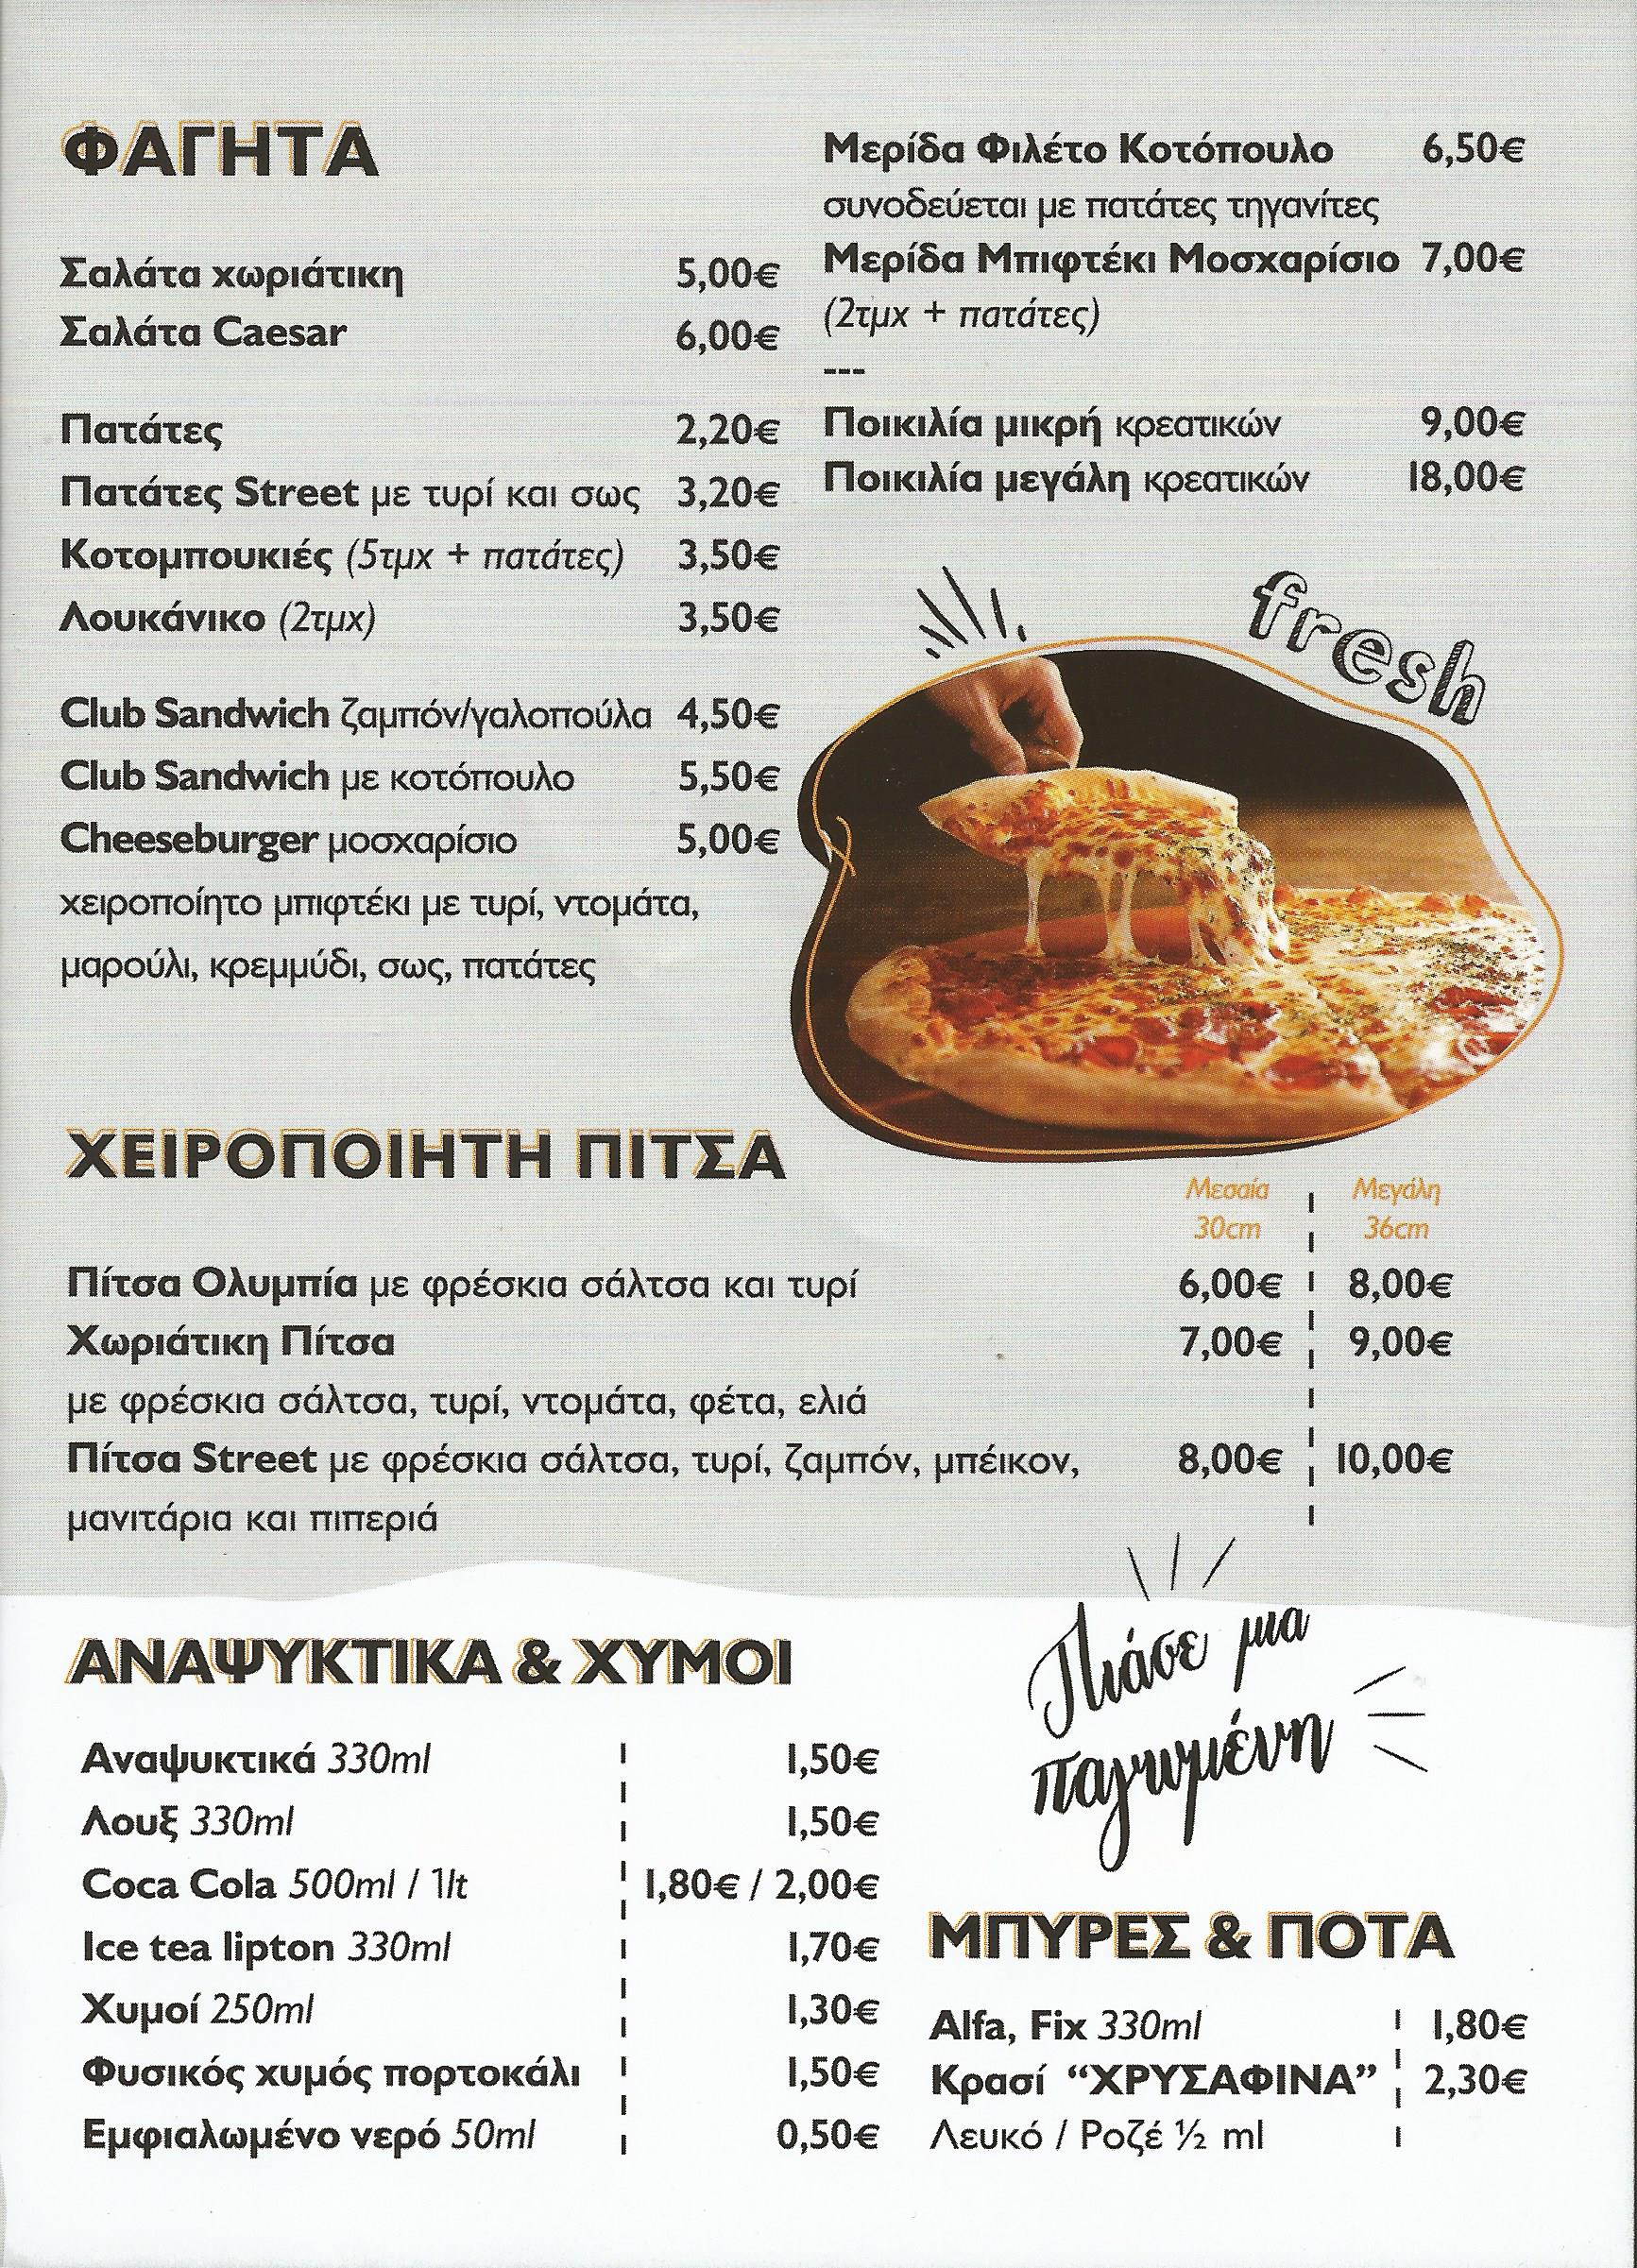 DELIVERY ΜΕΝΟΥ STREET 73 ΣΠΑΡΤΗ SNACK BAR COFFEE PIZZA ΤΗΛ. 2731100455